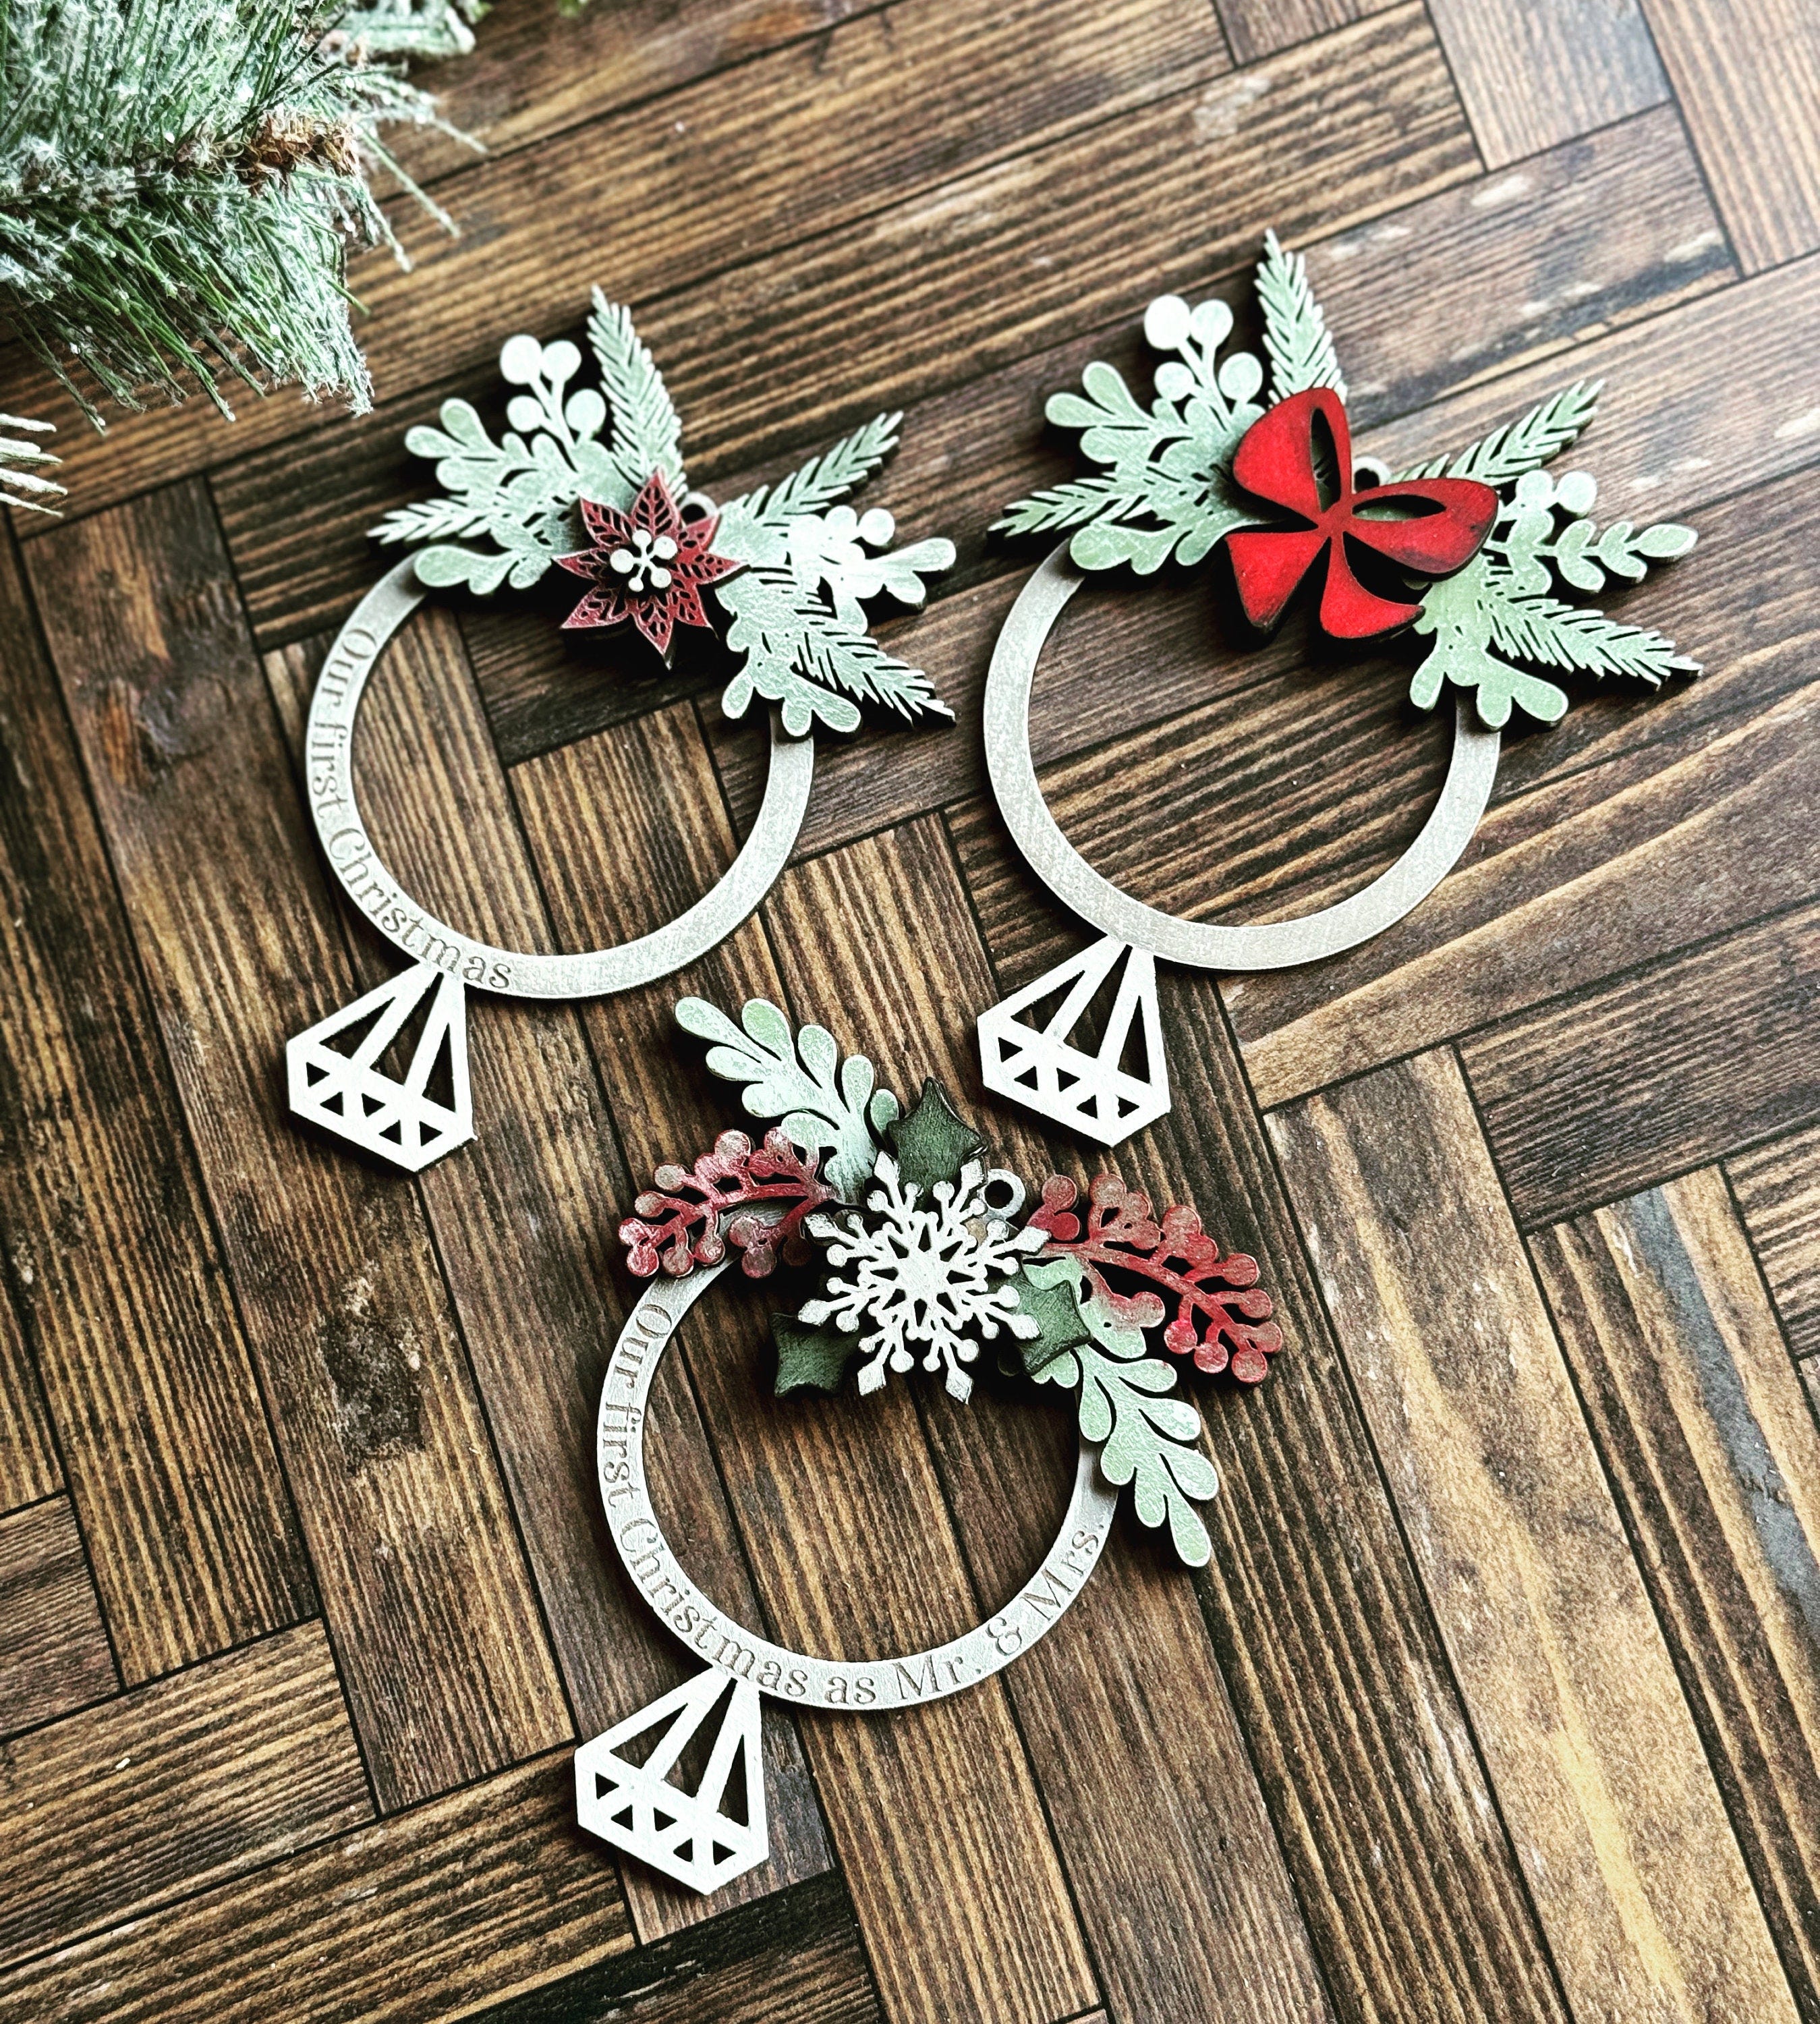 Mistletoe and Holly Diamond Ring Ornament Set of 3 SVG Digital Download for Glowforge or Laser -Not a Physical Item Read Item Description